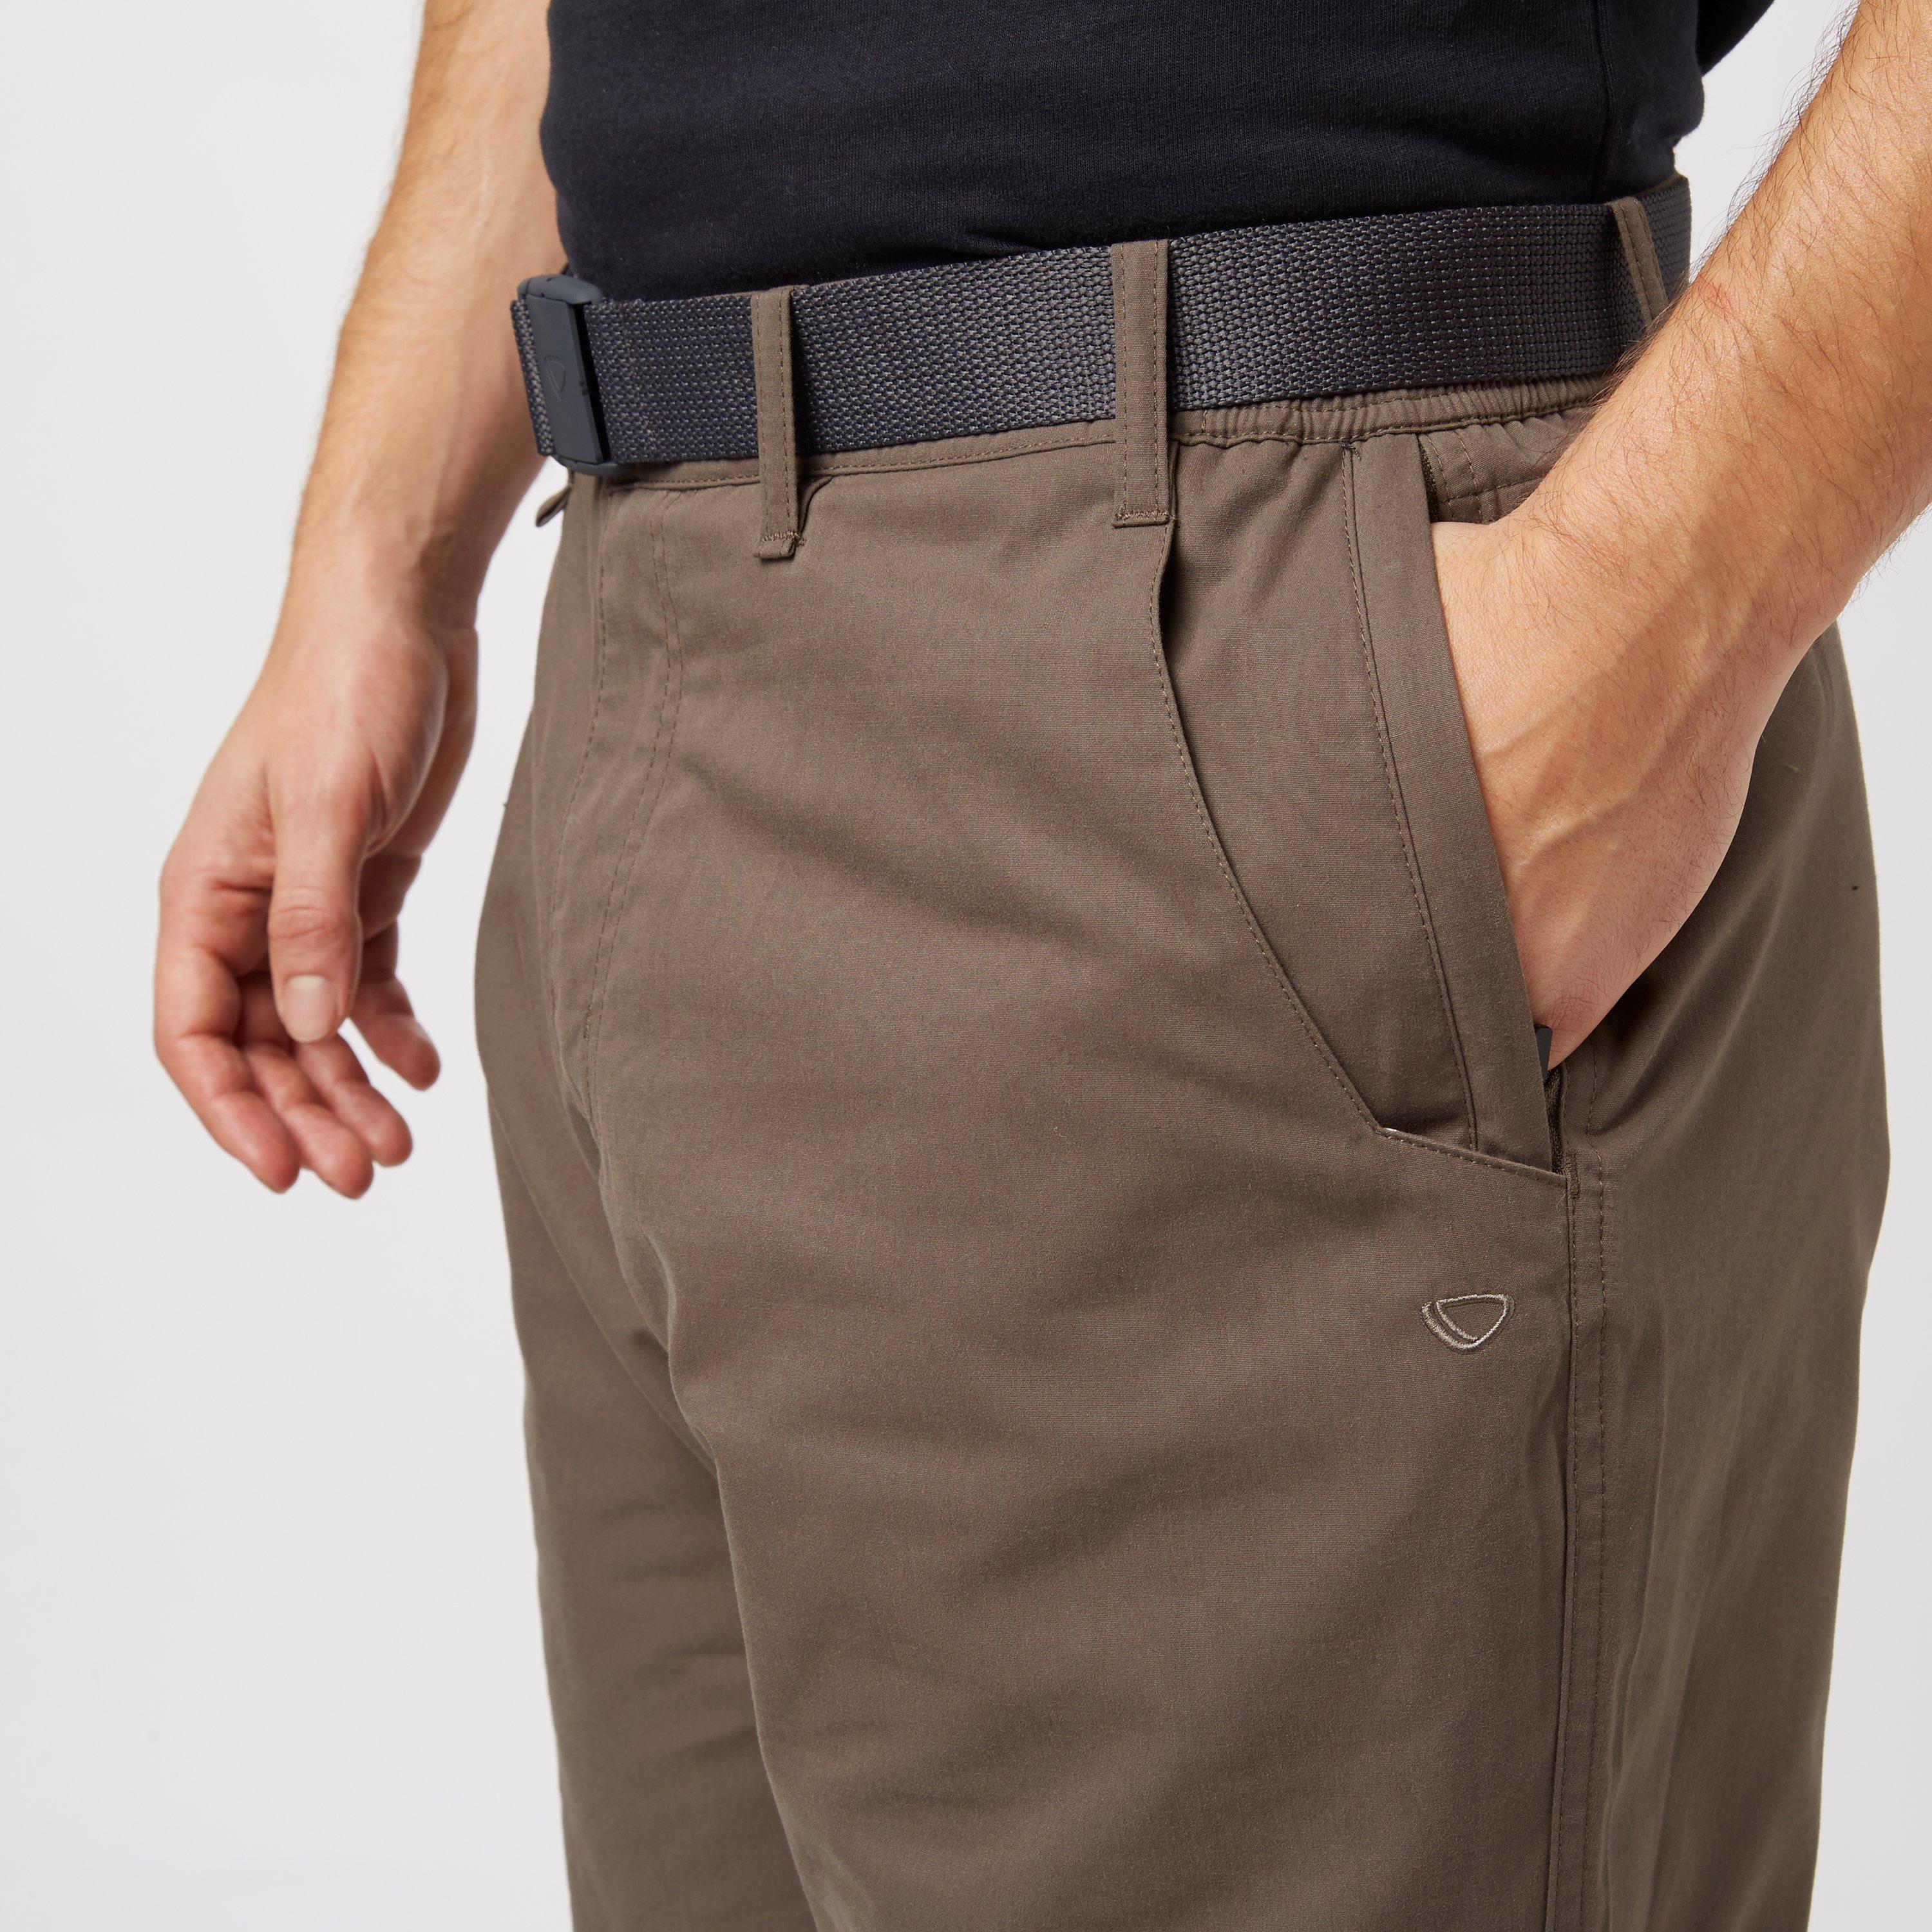 men's thermal lined walking trousers